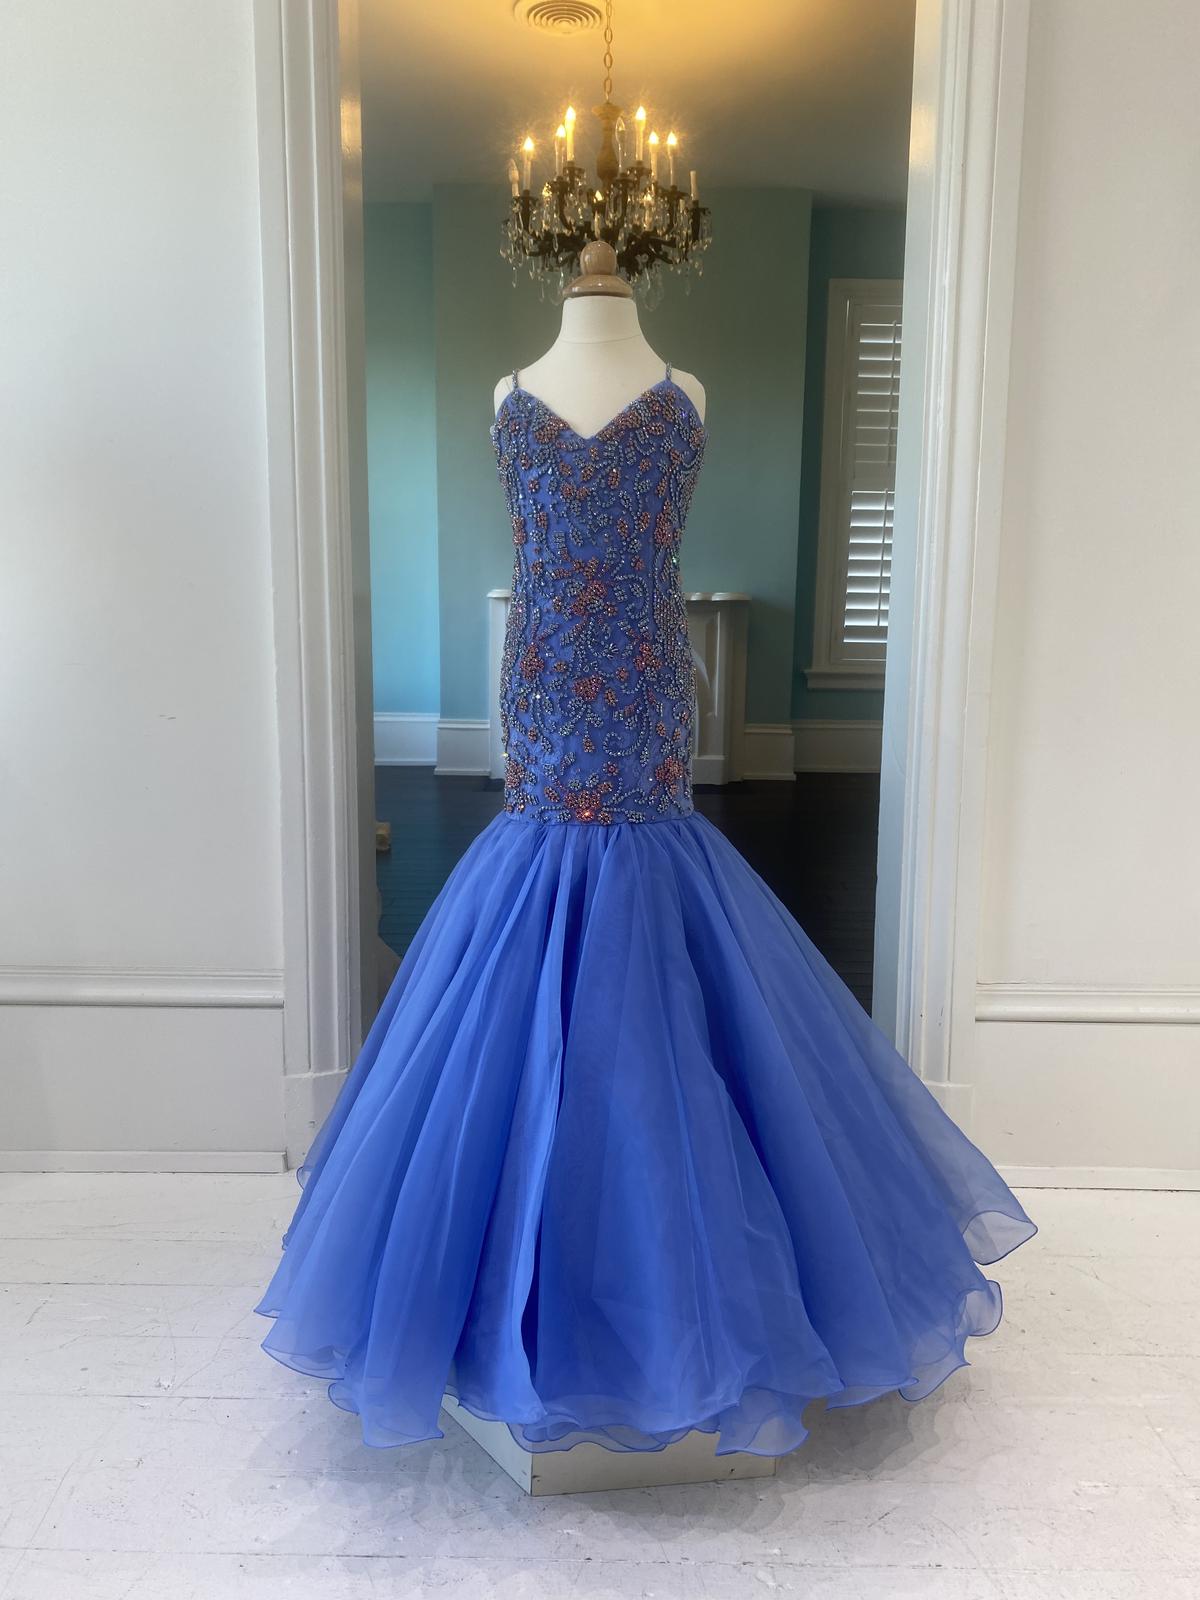 Sherri Hill Periwinkle Children's Pageant Gown K54389